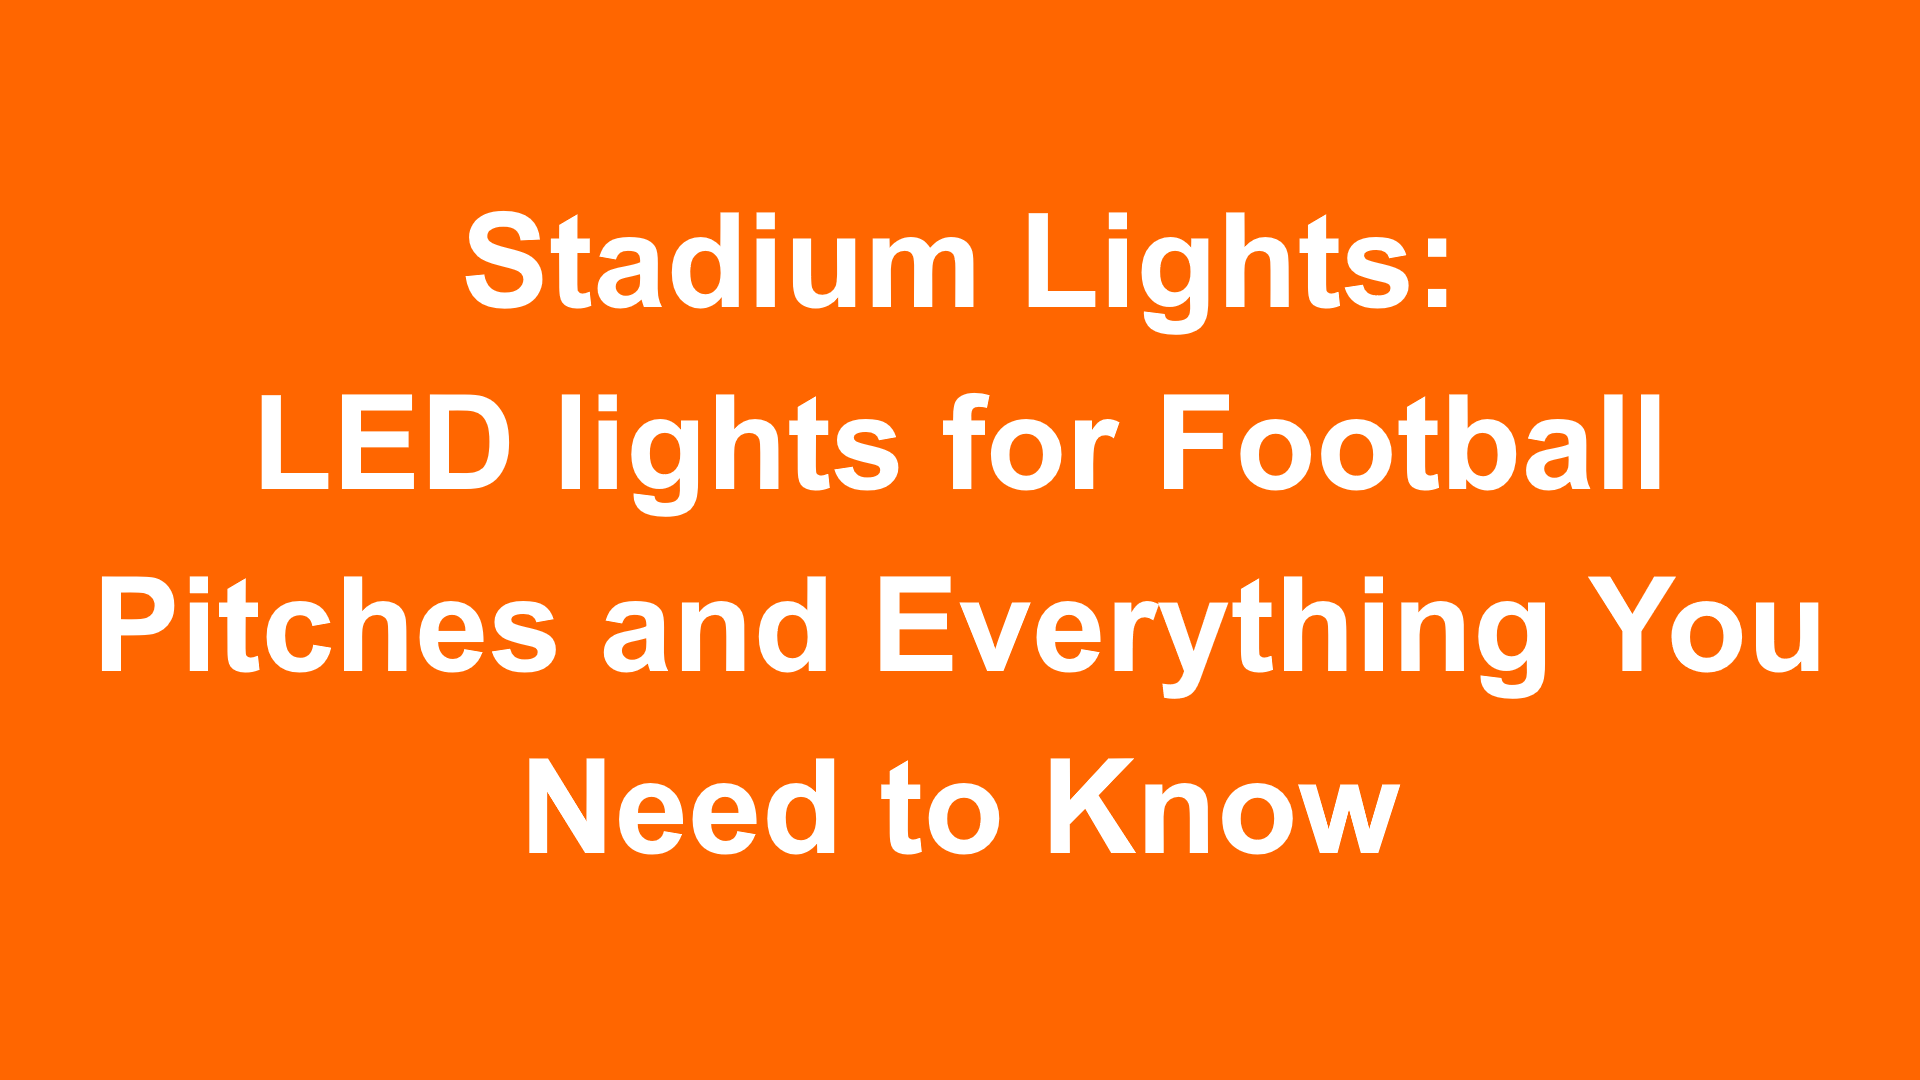 LED lights for Football Pitches and Everything You Need to Know